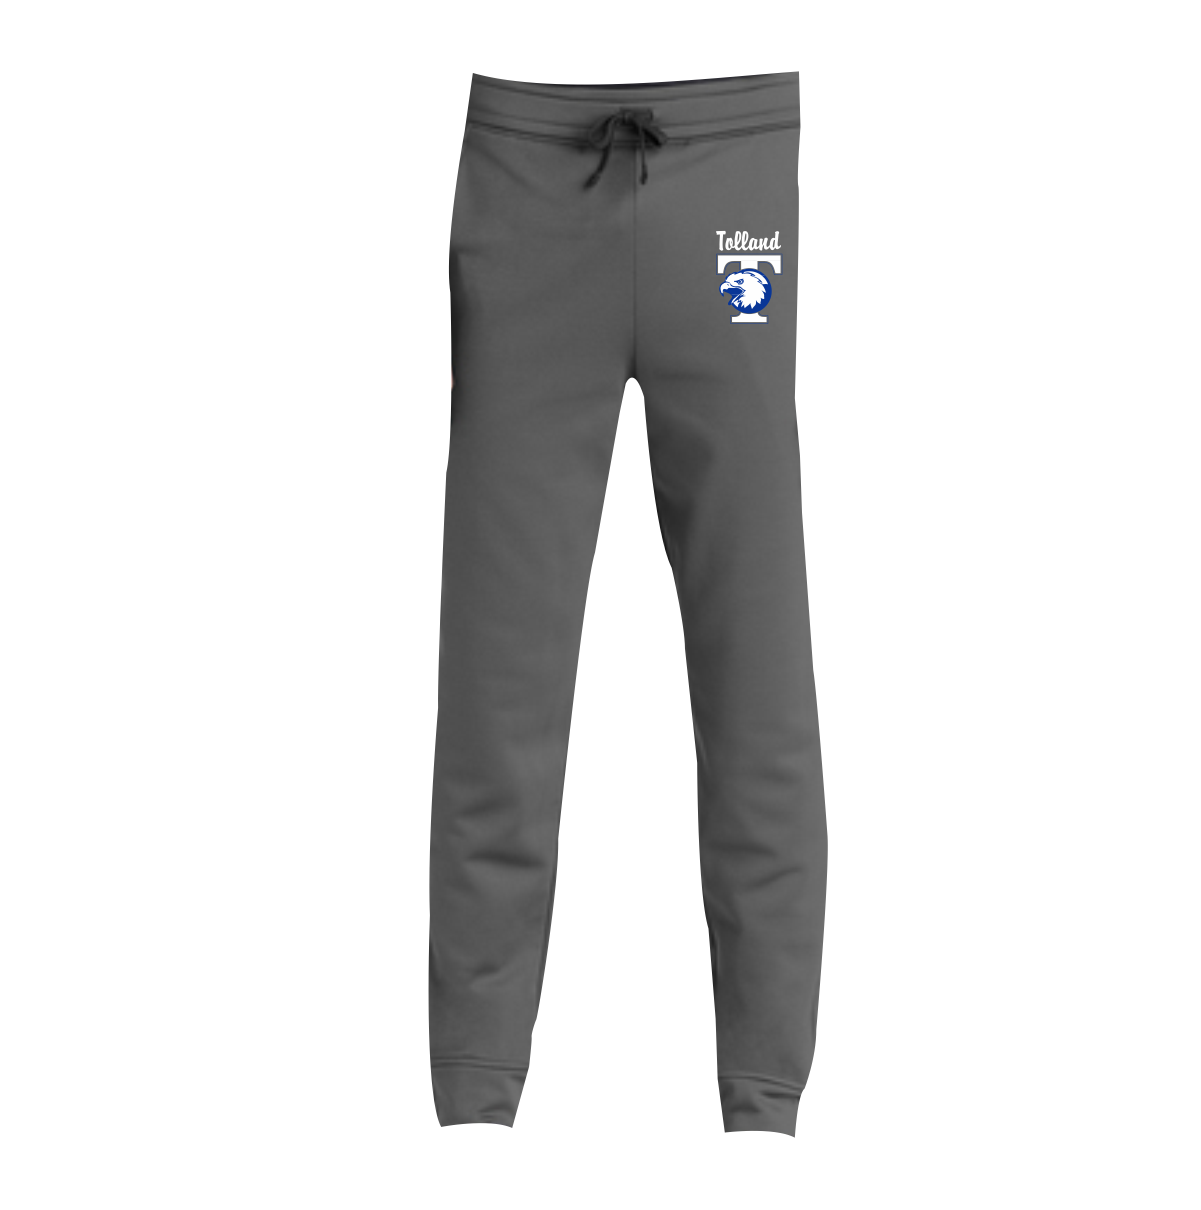 Tolland Eagles Basketball Jogger Pant in Dark Smoke Gray or Black – The ...